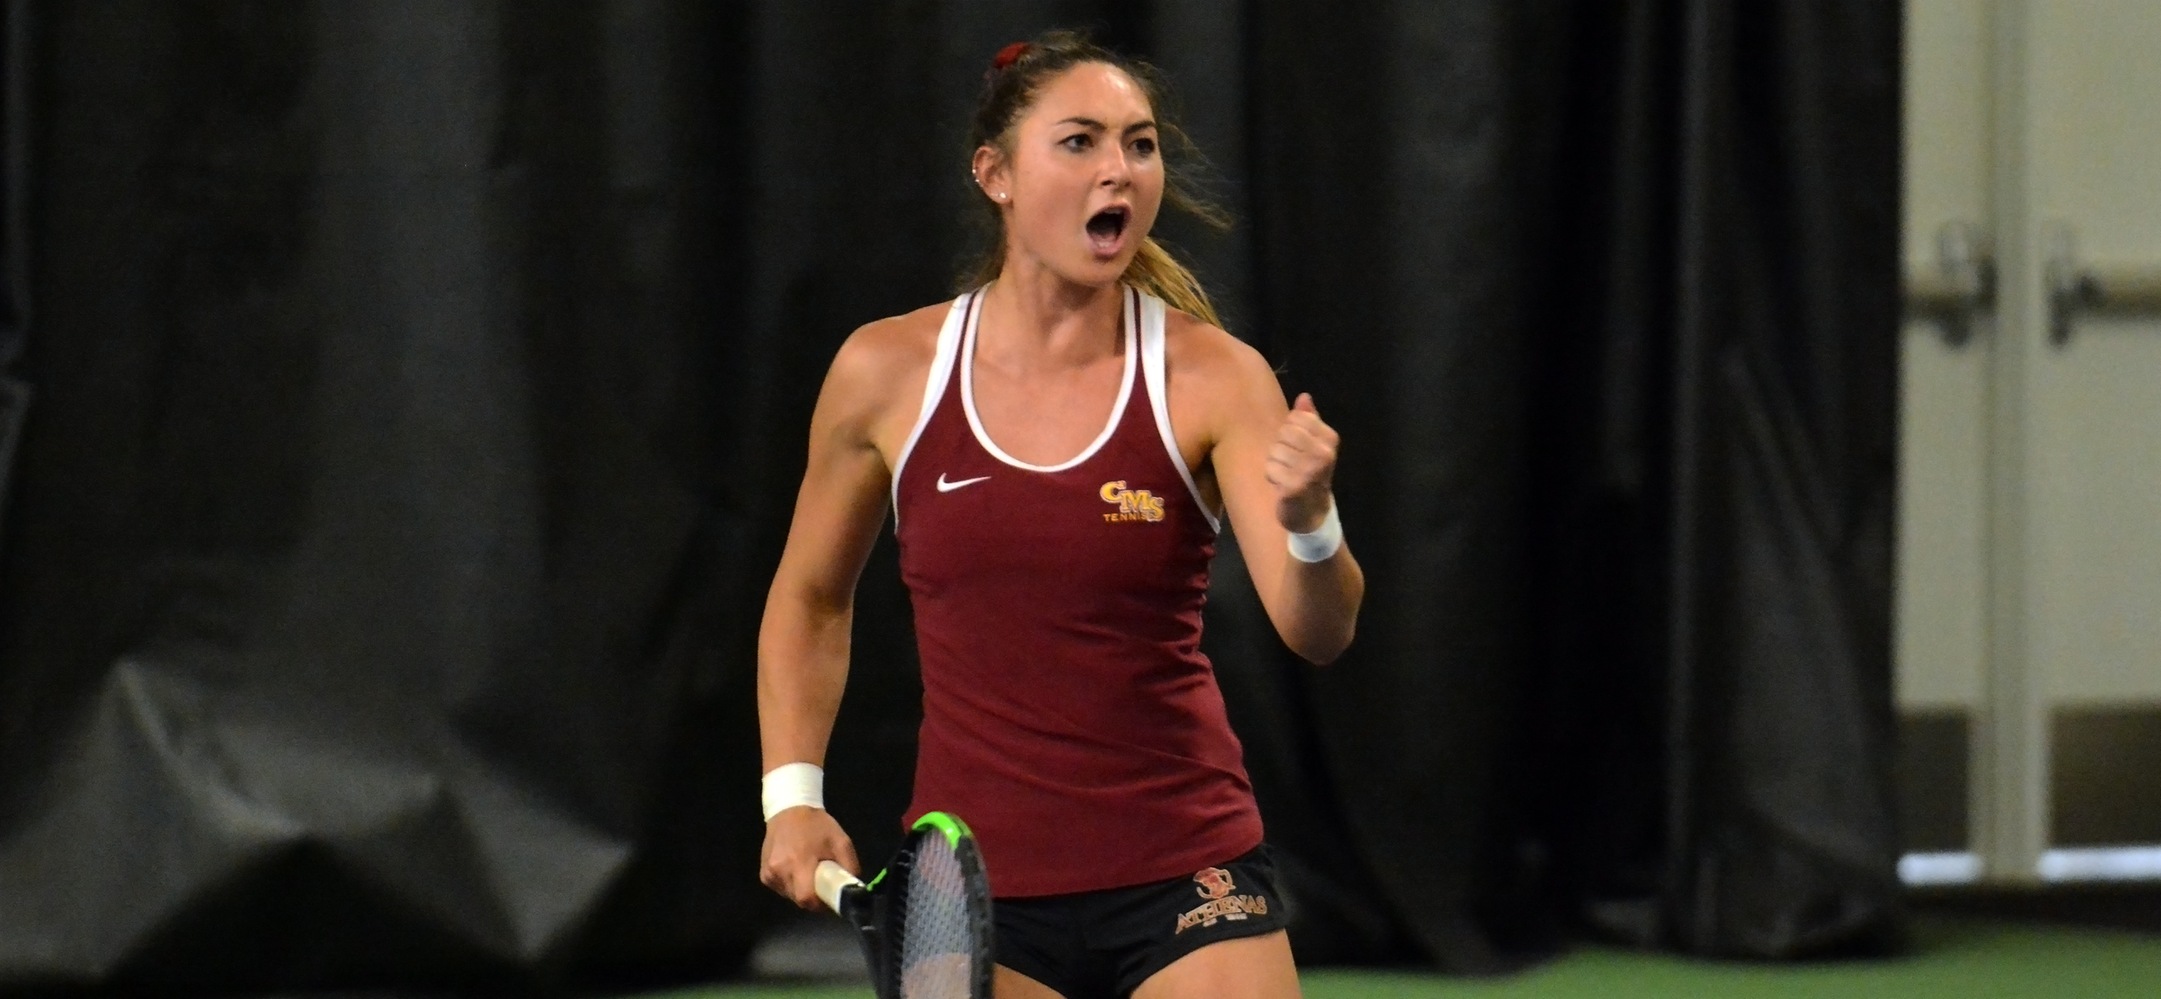 On To The Semis! CMS Women's Tennis Takes 5-1 Win over Carnegie Mellon in NCAA Quarterfinals